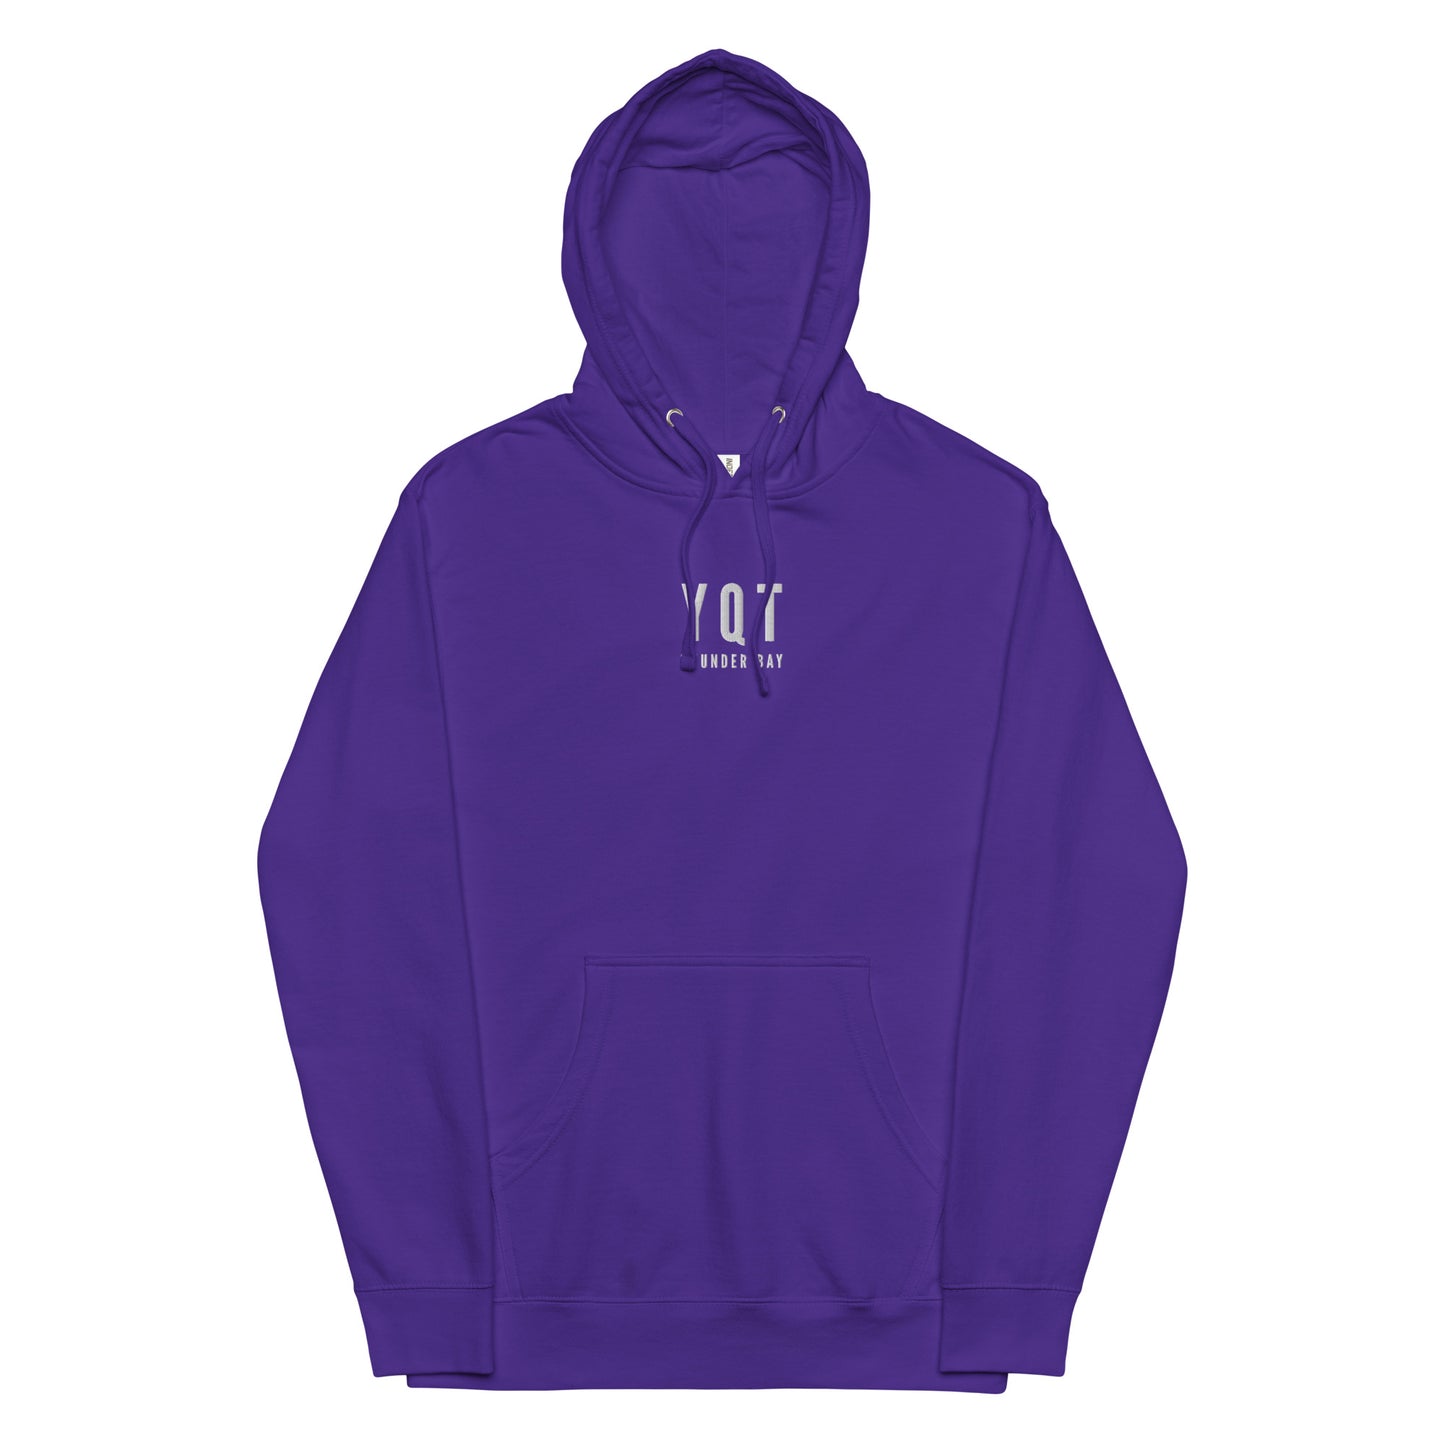 City Midweight Hoodie - White • YQT Thunder Bay • YHM Designs - Image 12